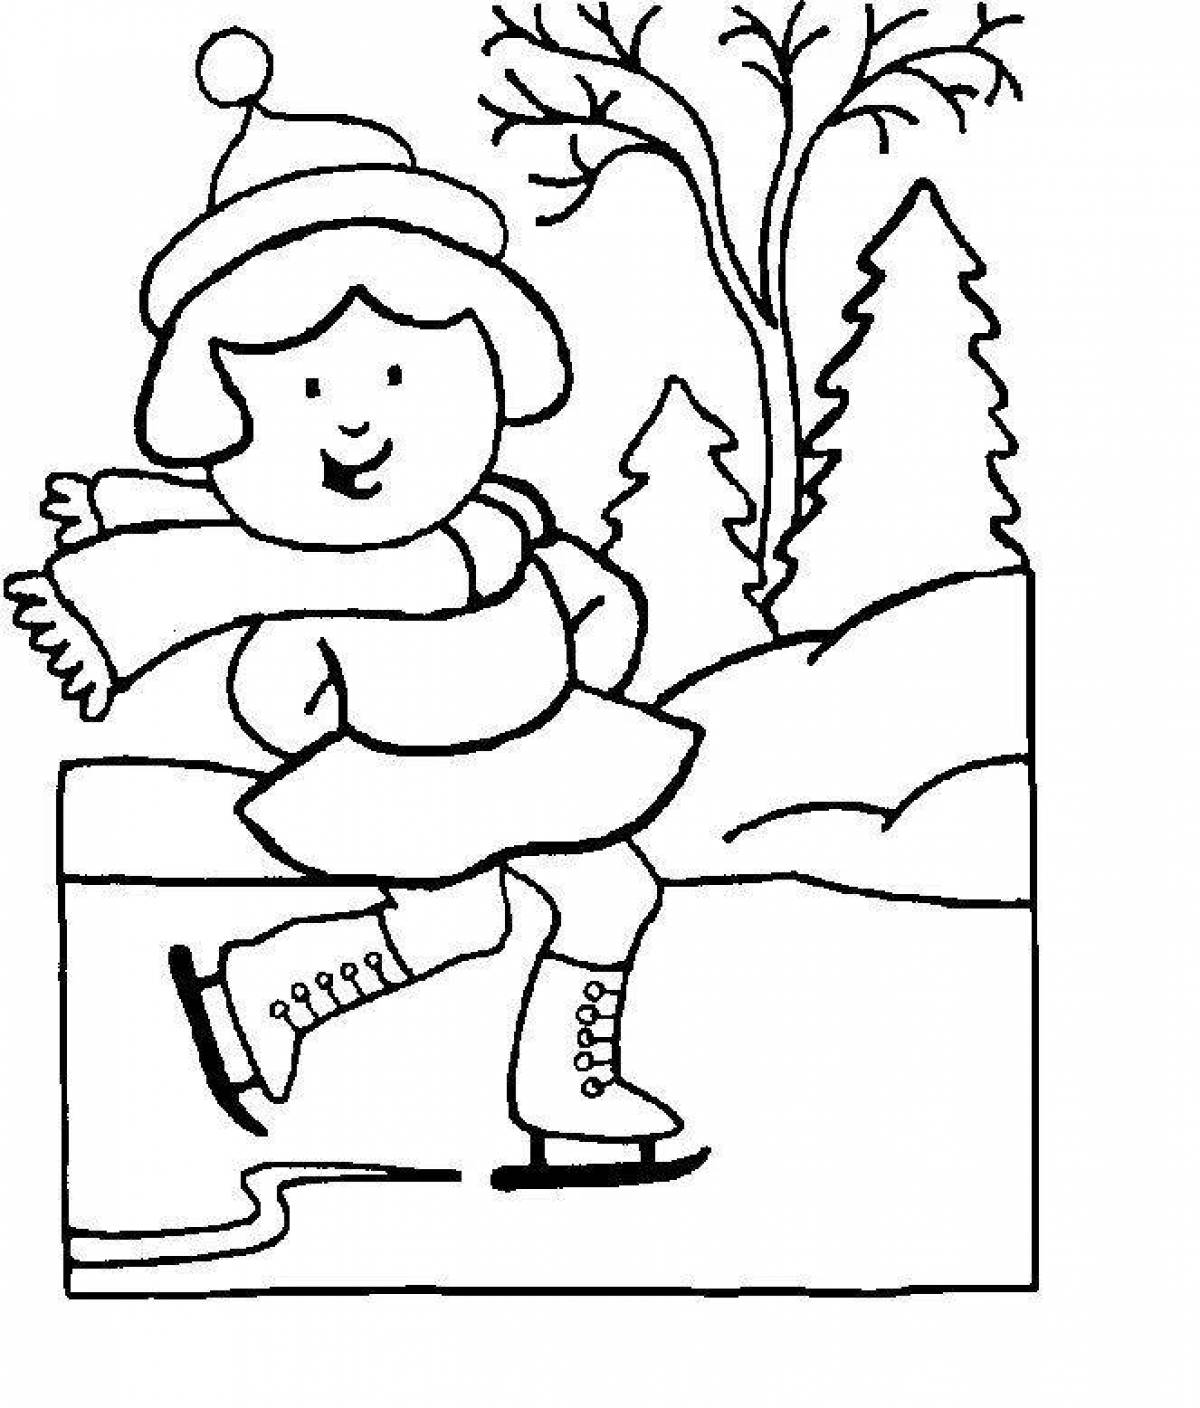 Glazed winter coloring page